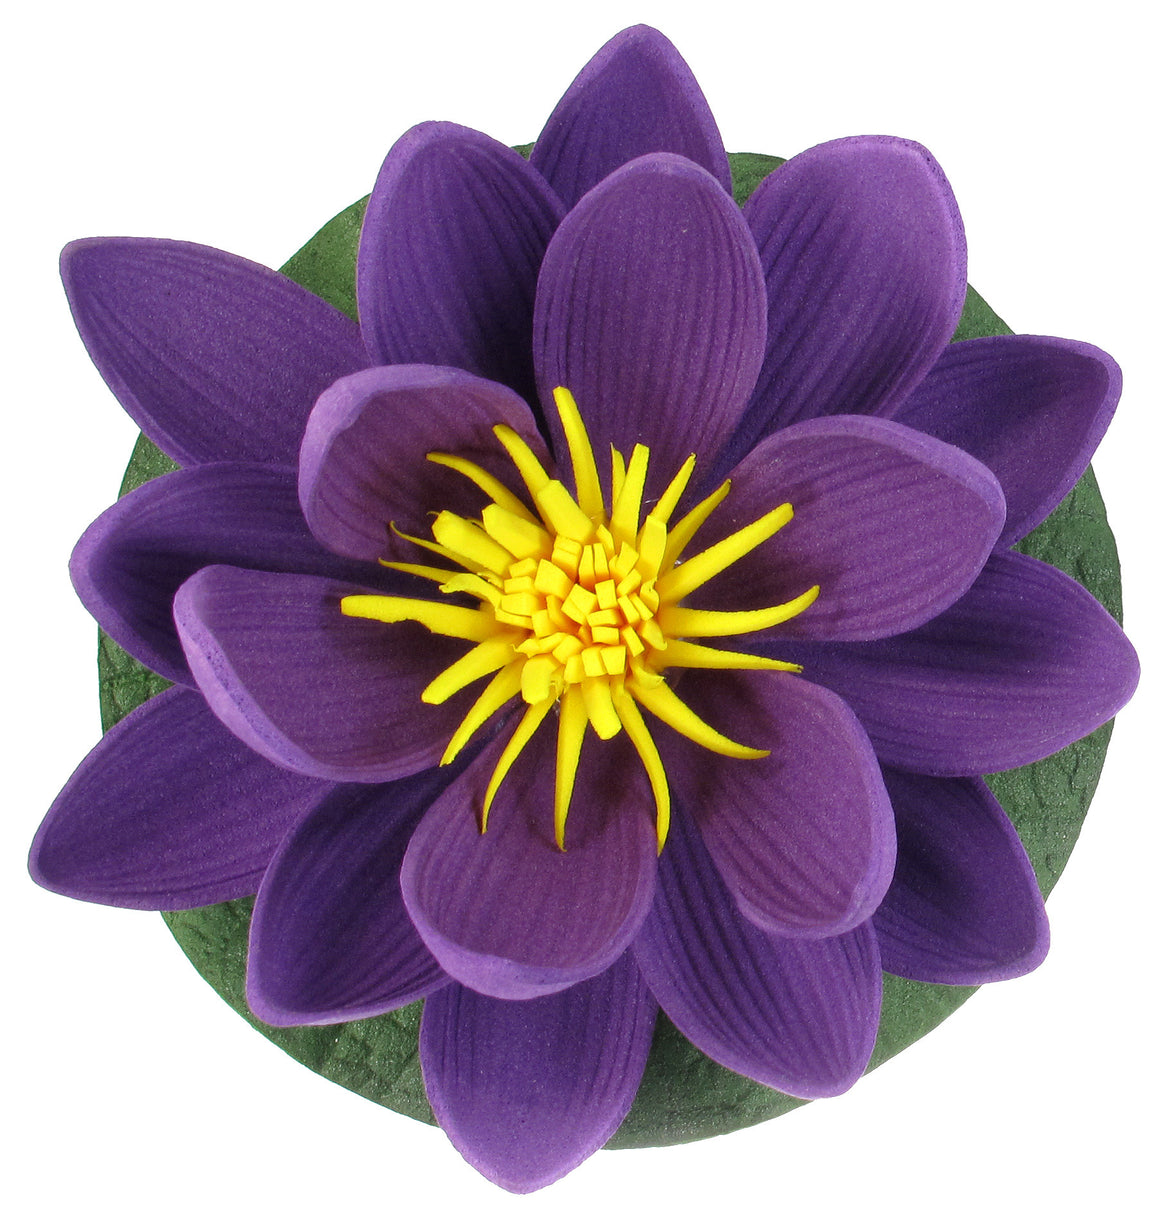 Small Floating Foam Water Lily Flower, For Small Water Feature, Approx. 3.25" x 3.25" x 2", Purple - TropicaZona